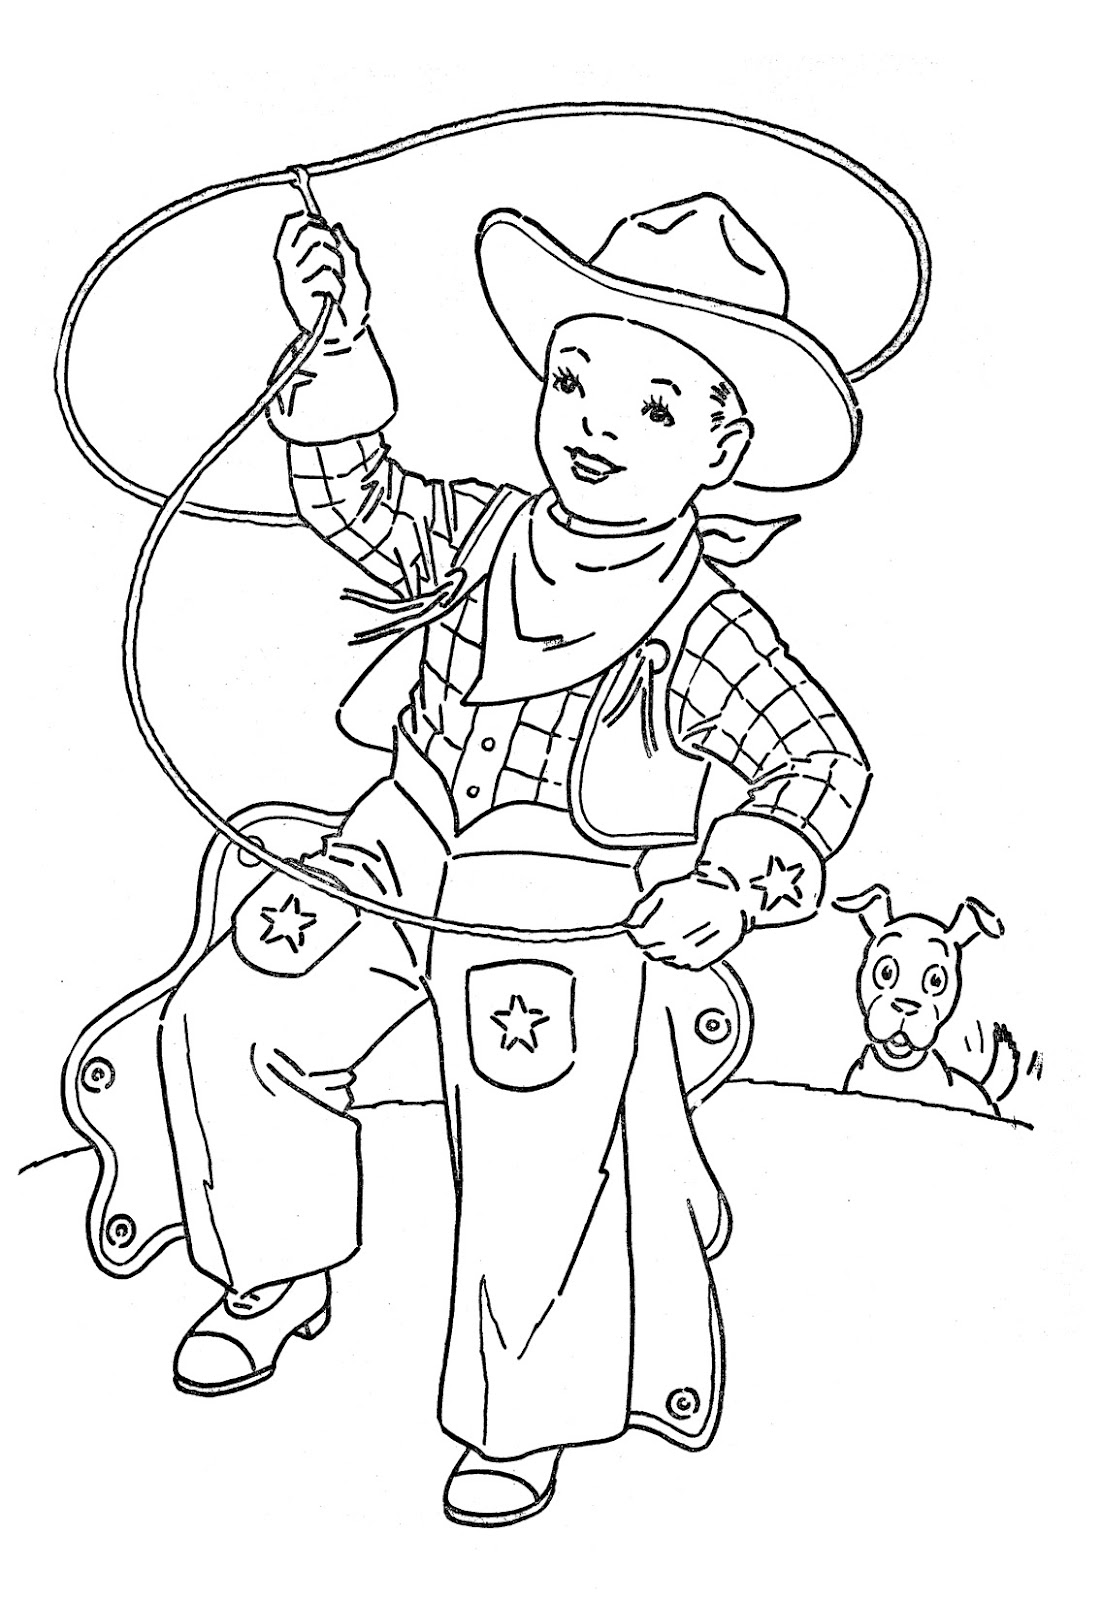 Coloring page: Cowboy (Characters) #91551 - Free Printable Coloring Pages